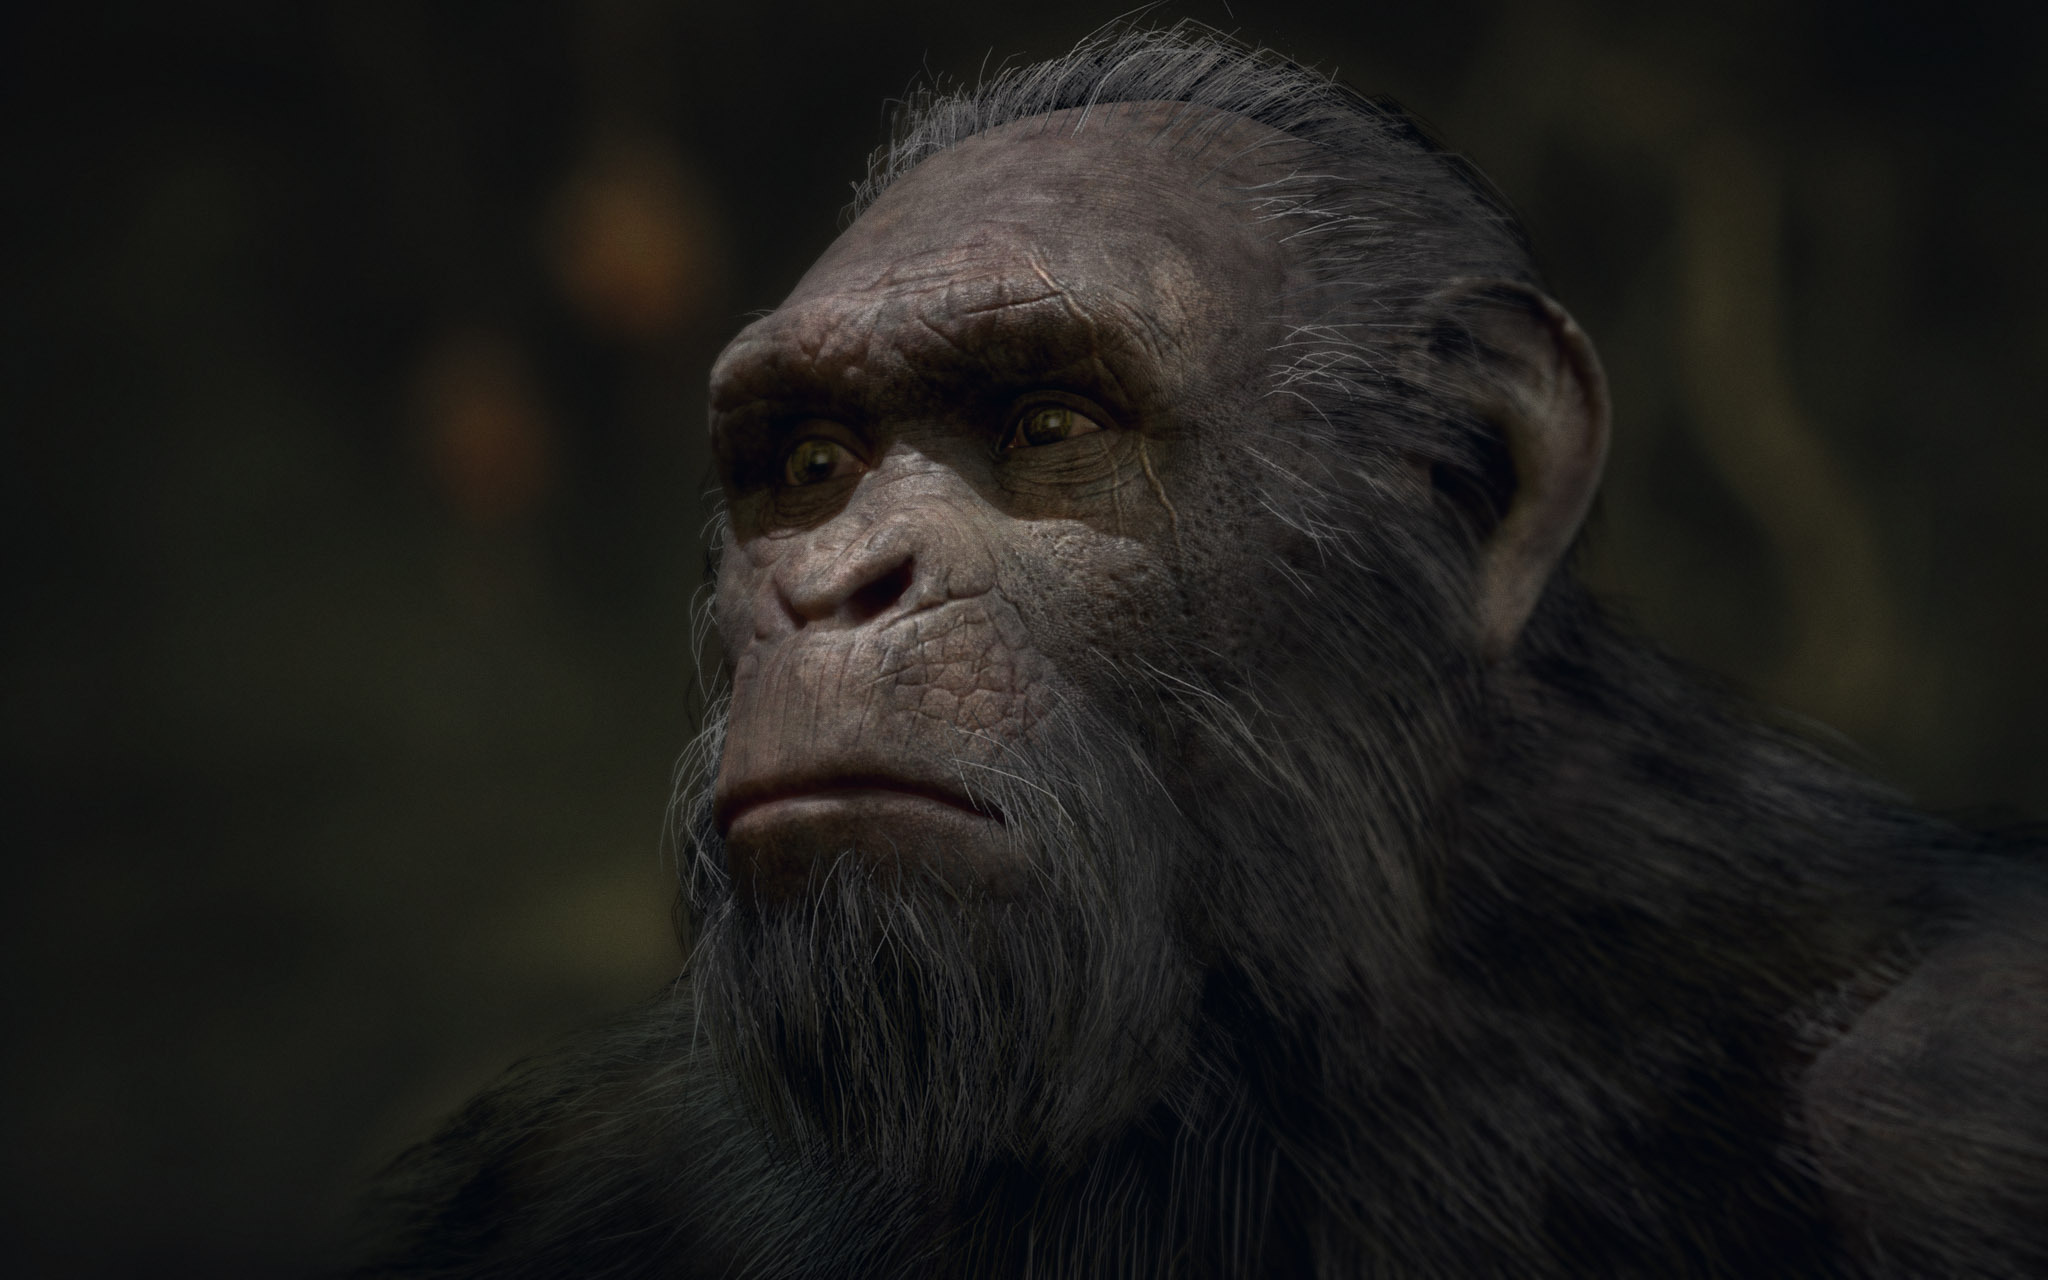 Игра планета обезьян. Planet of the Apes: last Frontier. Planet of the Apes: last Frontier игра. Planet of the Apes: last Frontier пс4. Planet of the Apes 4.